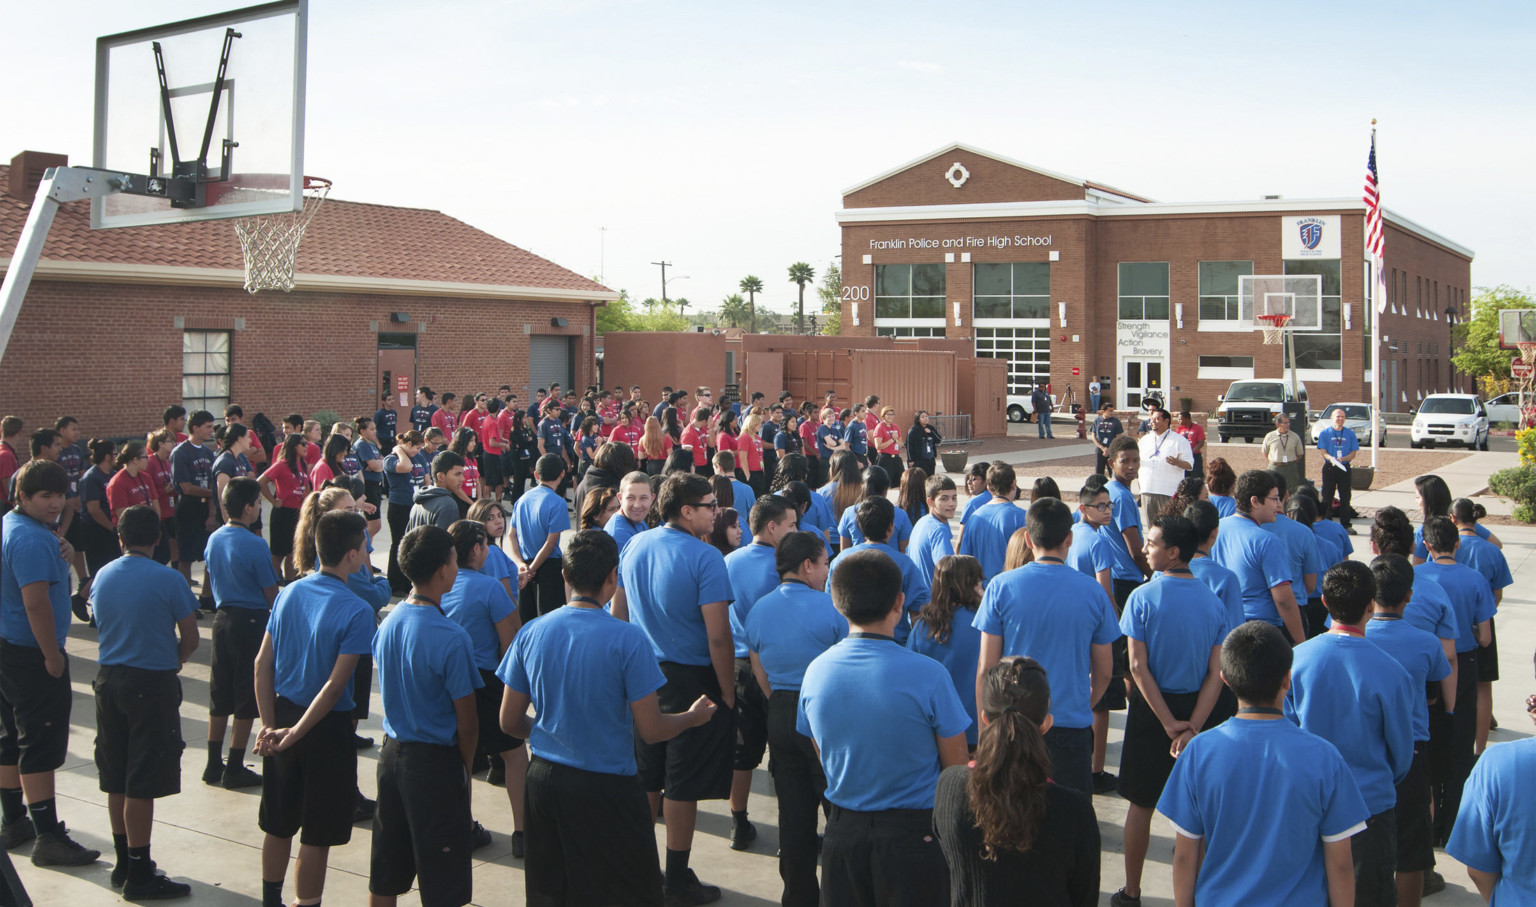 students in an assembly outside on the basketball courts in front of Franklin Police and Fire High School, 2 brick buildings